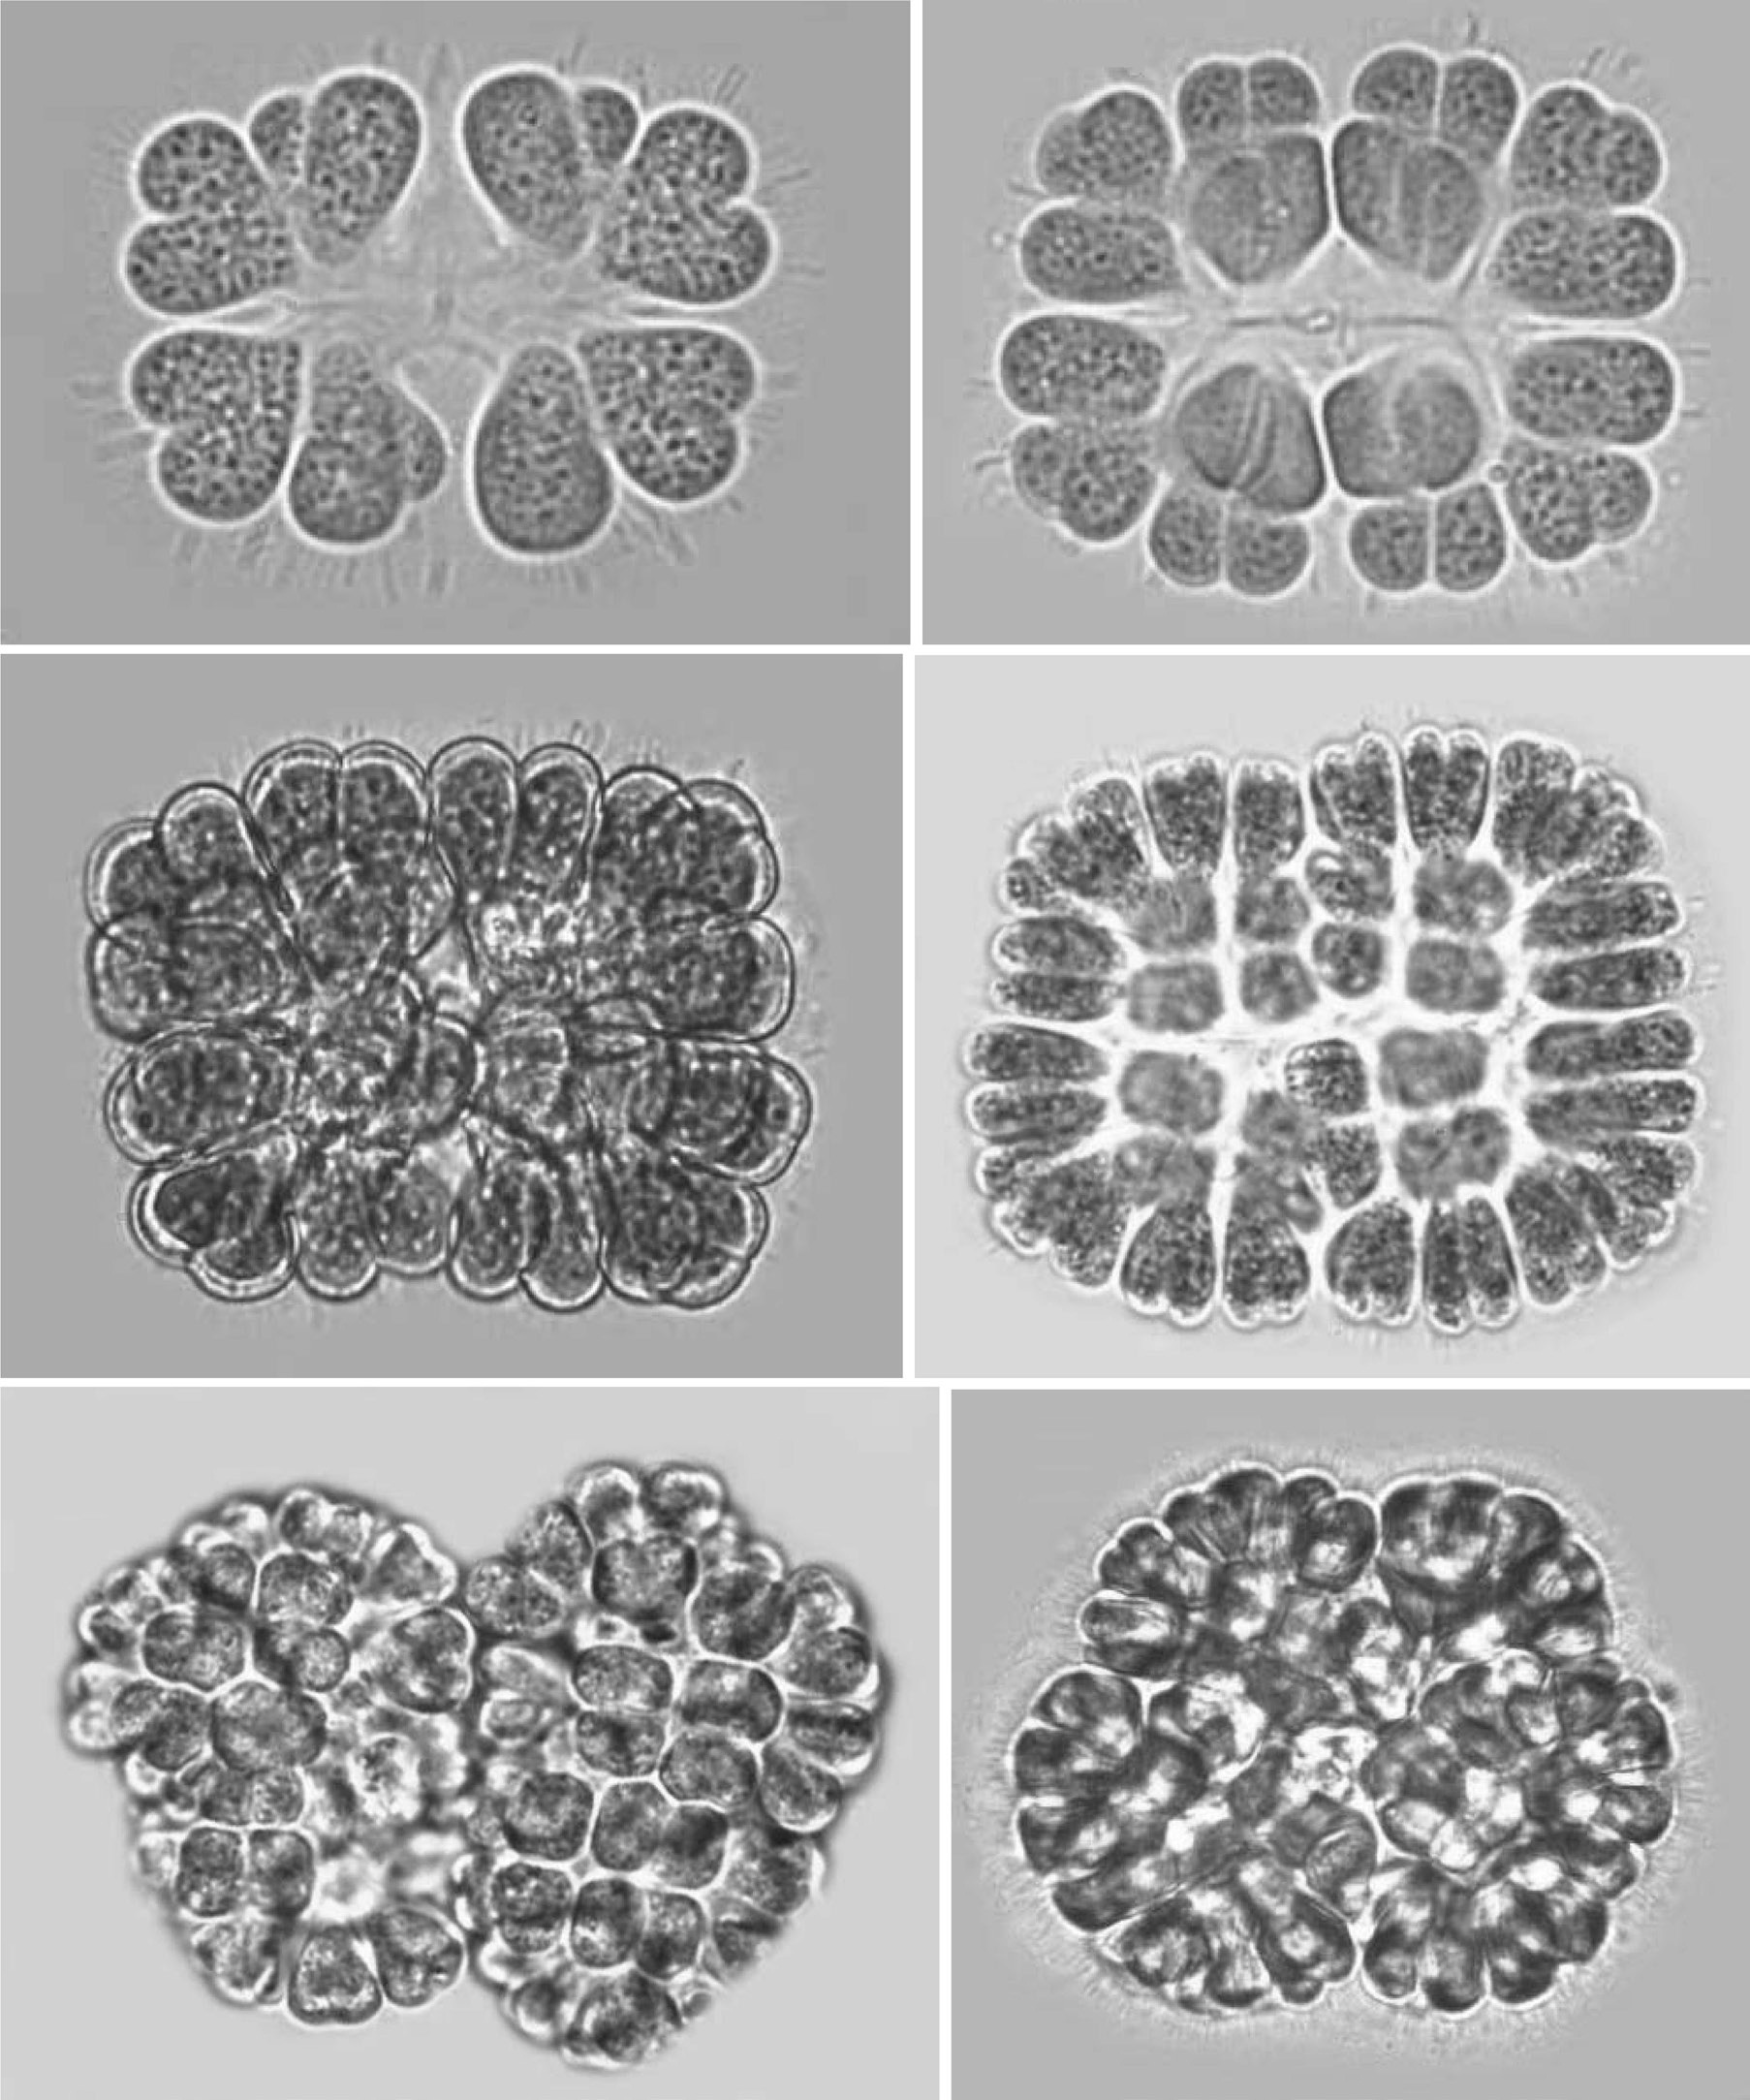 Gomphosphaeria aponina Kutzing. fig. 1. A young eight-celled colony. All cells look cordiform with initiation of division from the outer end and granulated cell content. fig. 2. A 16-celled colony. fig. 3. A 32-celled colony. Cells have thick envelopes. fig. 4. An actively growing 64-celled colony. Cells look thin and long compared to the cells of Fig. 1-3. fig. 5. A 128-celled bi-lobed colony. fig. 6. A 256-celled multi-lobed colony.